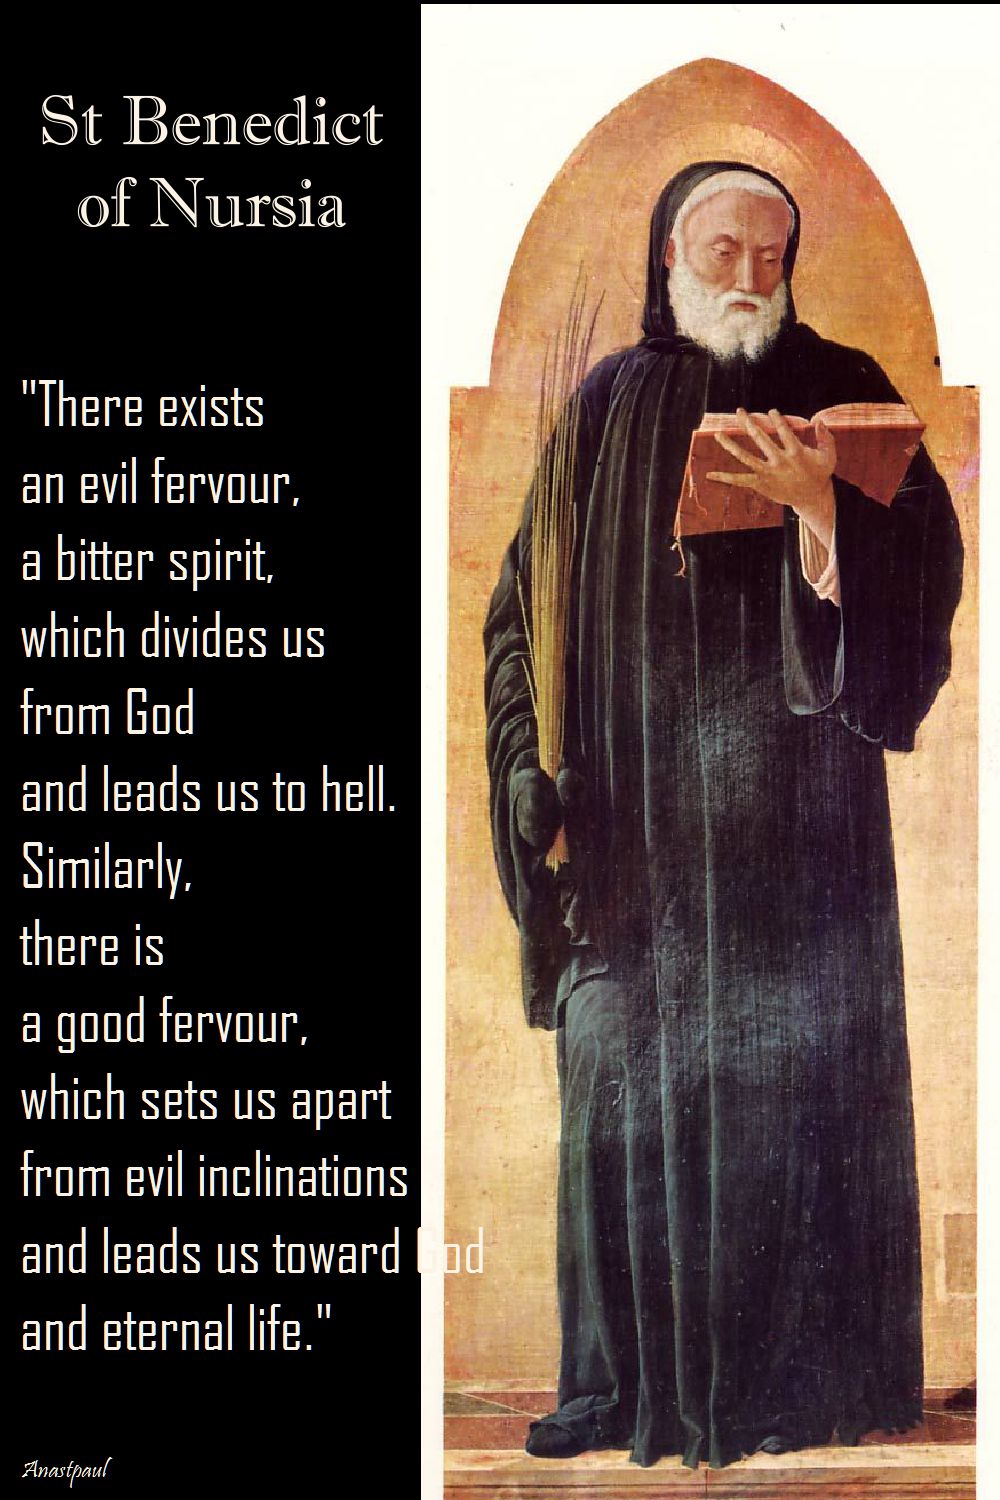 st benedict - there exists an evil fervour